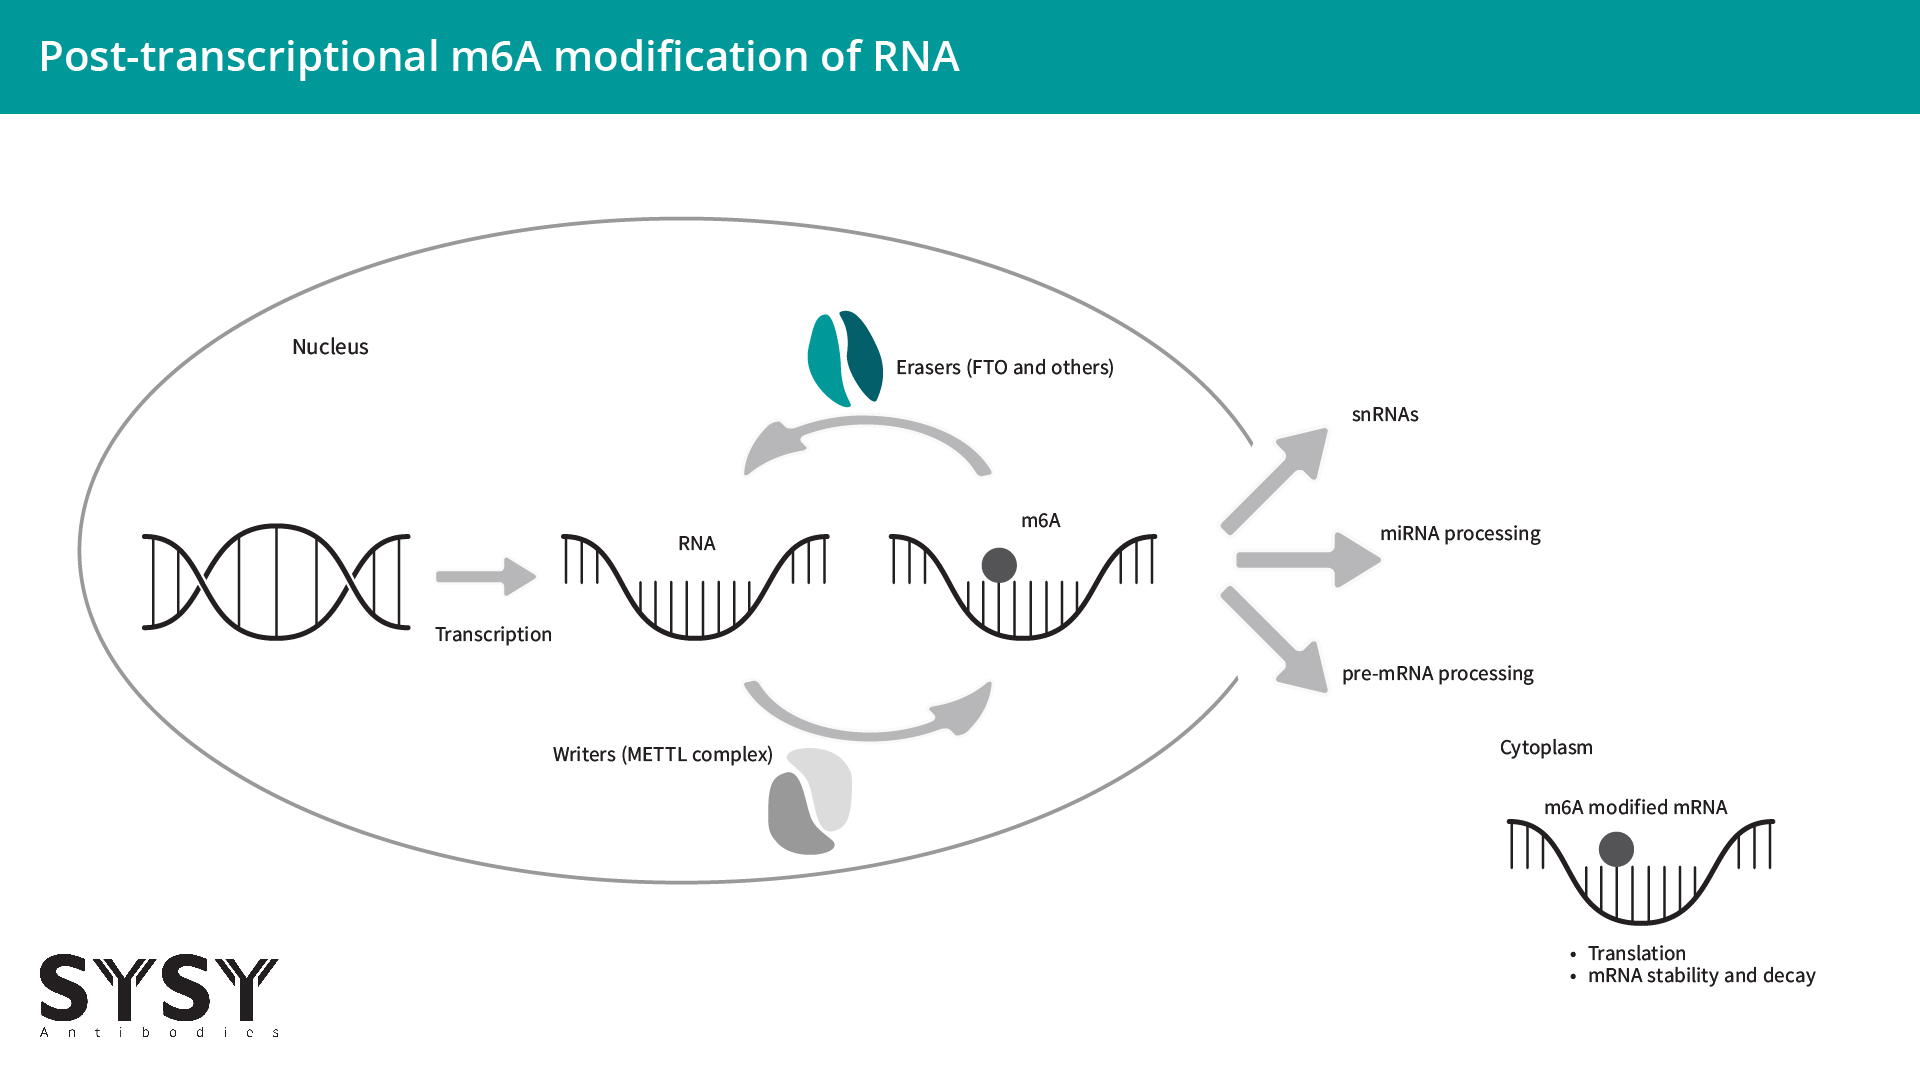 ​Schematic image of post-transcriptional m6A modification of RNA